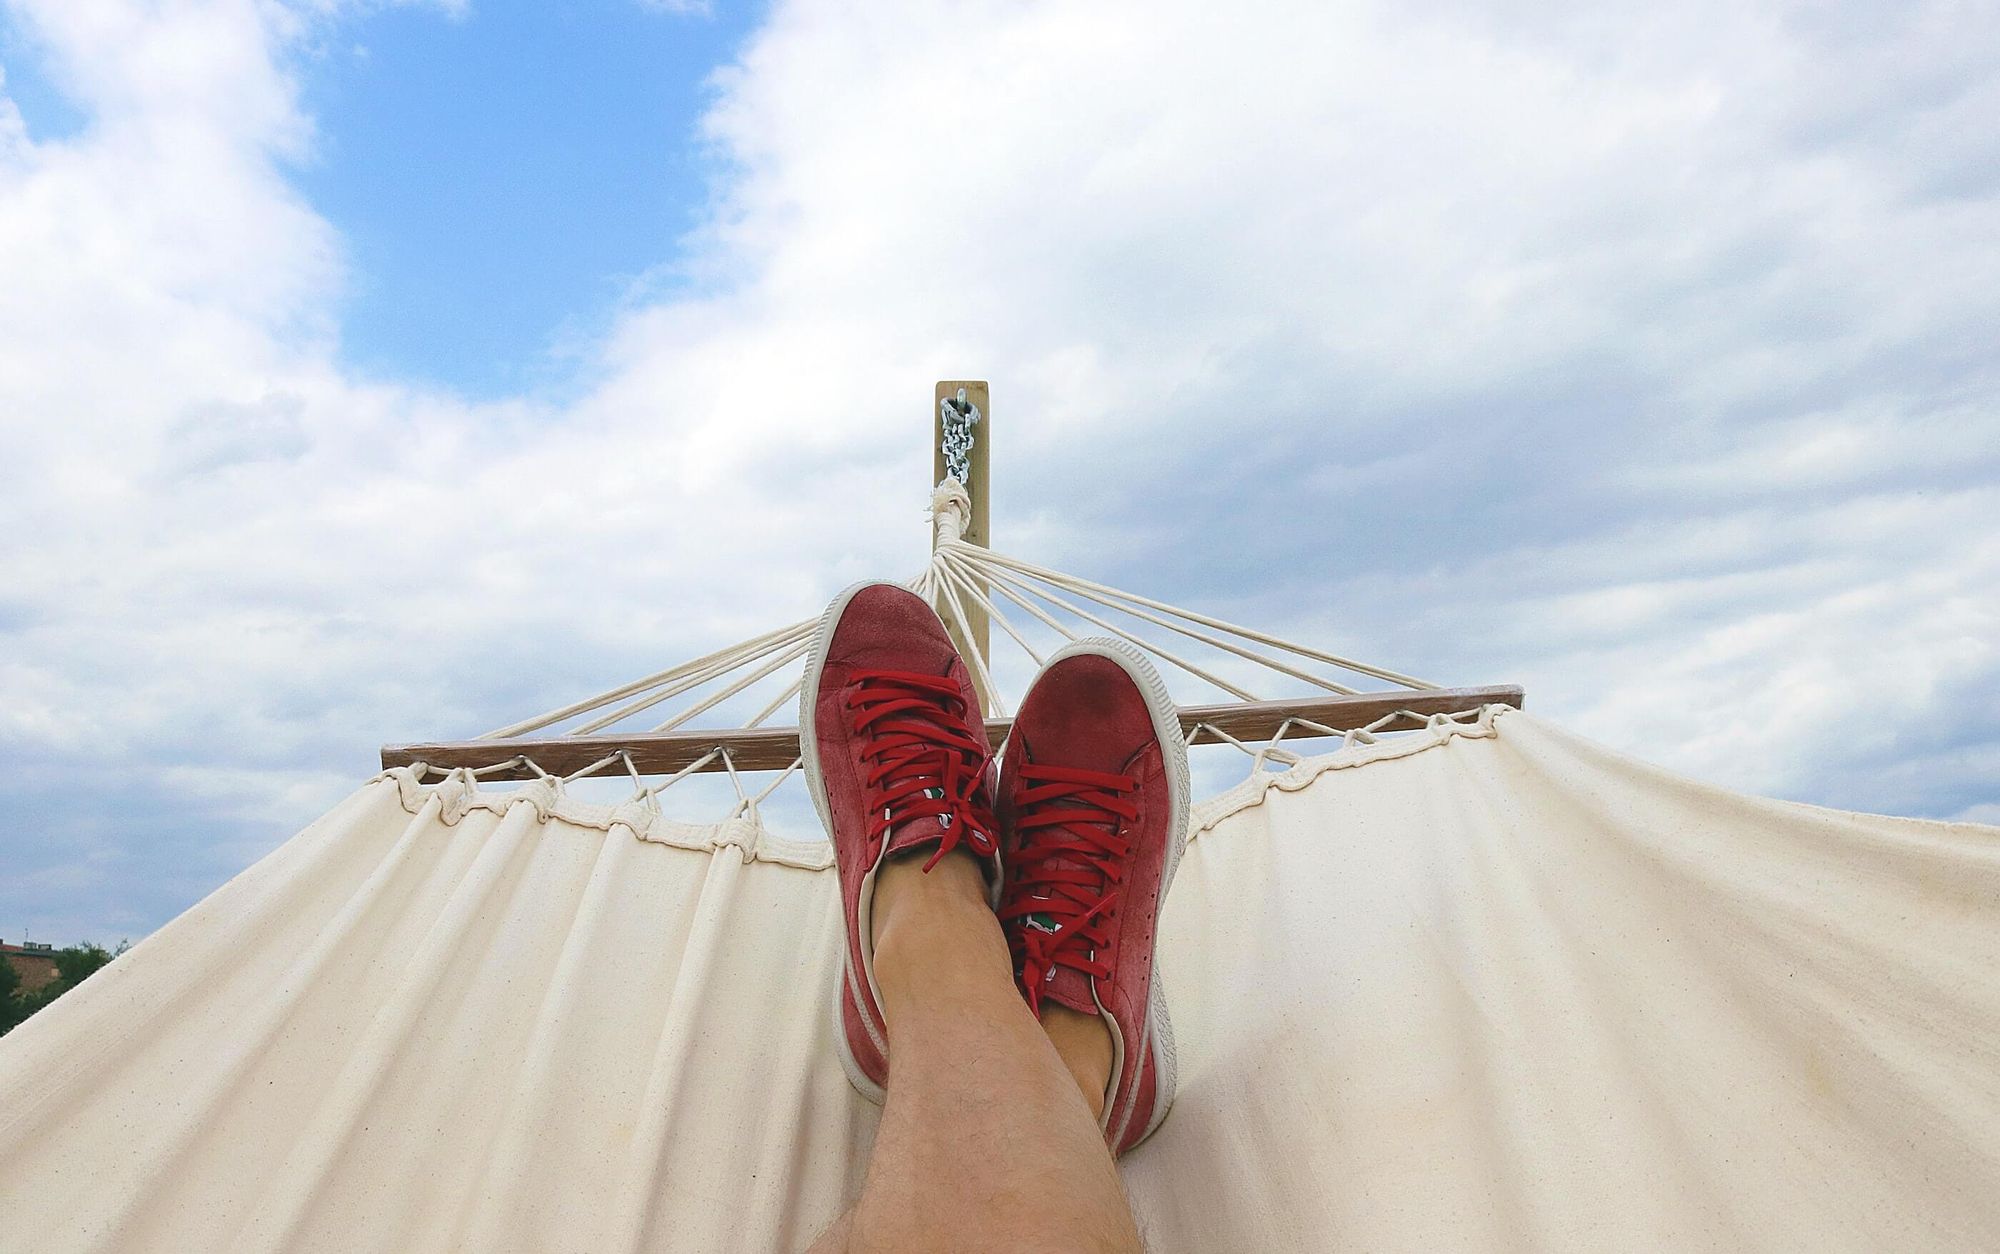 A pair of feet wearing red deck shoes in a canvas hammock with blue sky in the background.